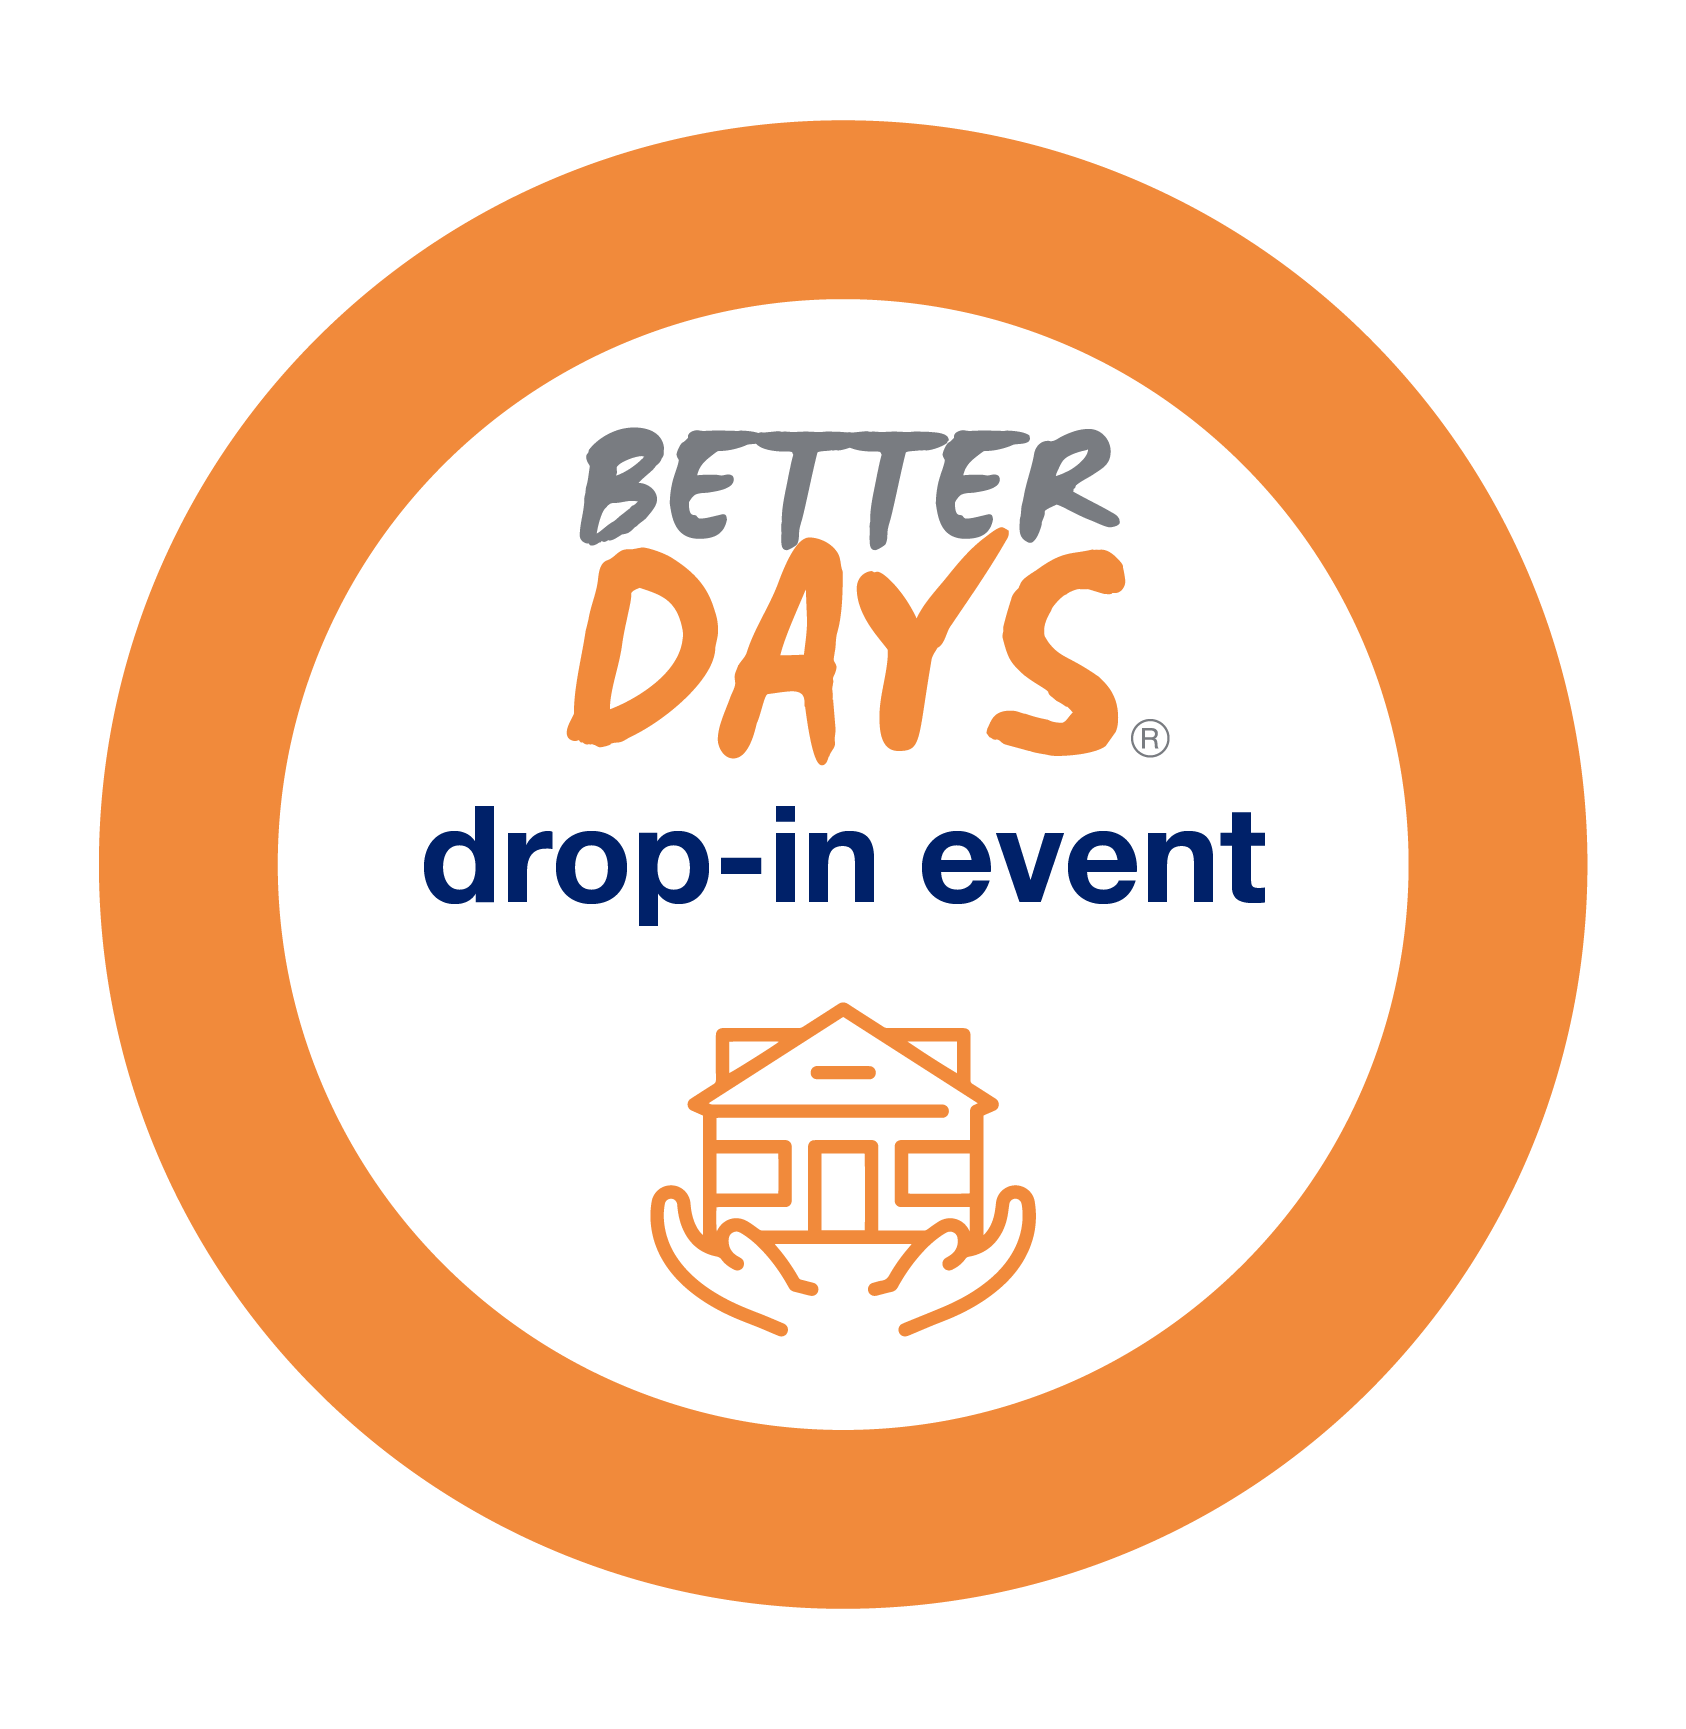 Better Days drop in event icon